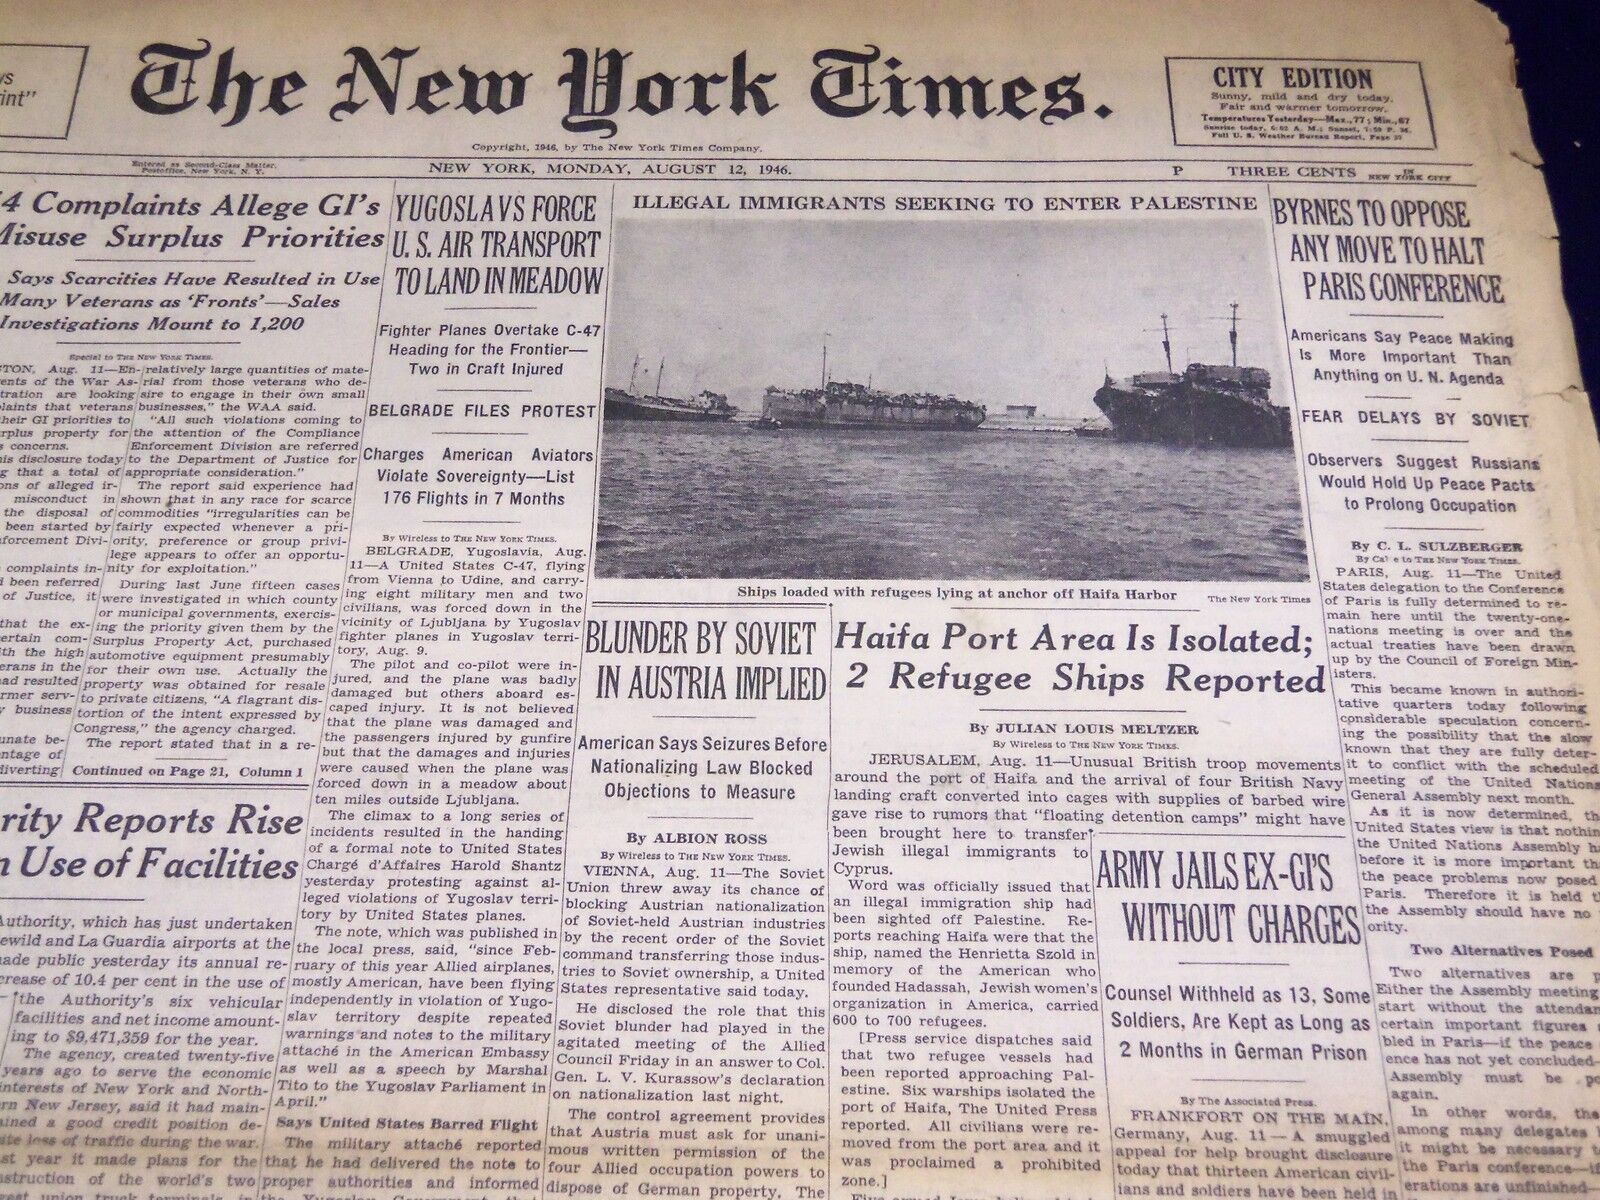 1946 AUGUST 12 NEW YORK TIMES - SHIPS WITH REFUGEES AT HAIFA HARBOR - NT 2632